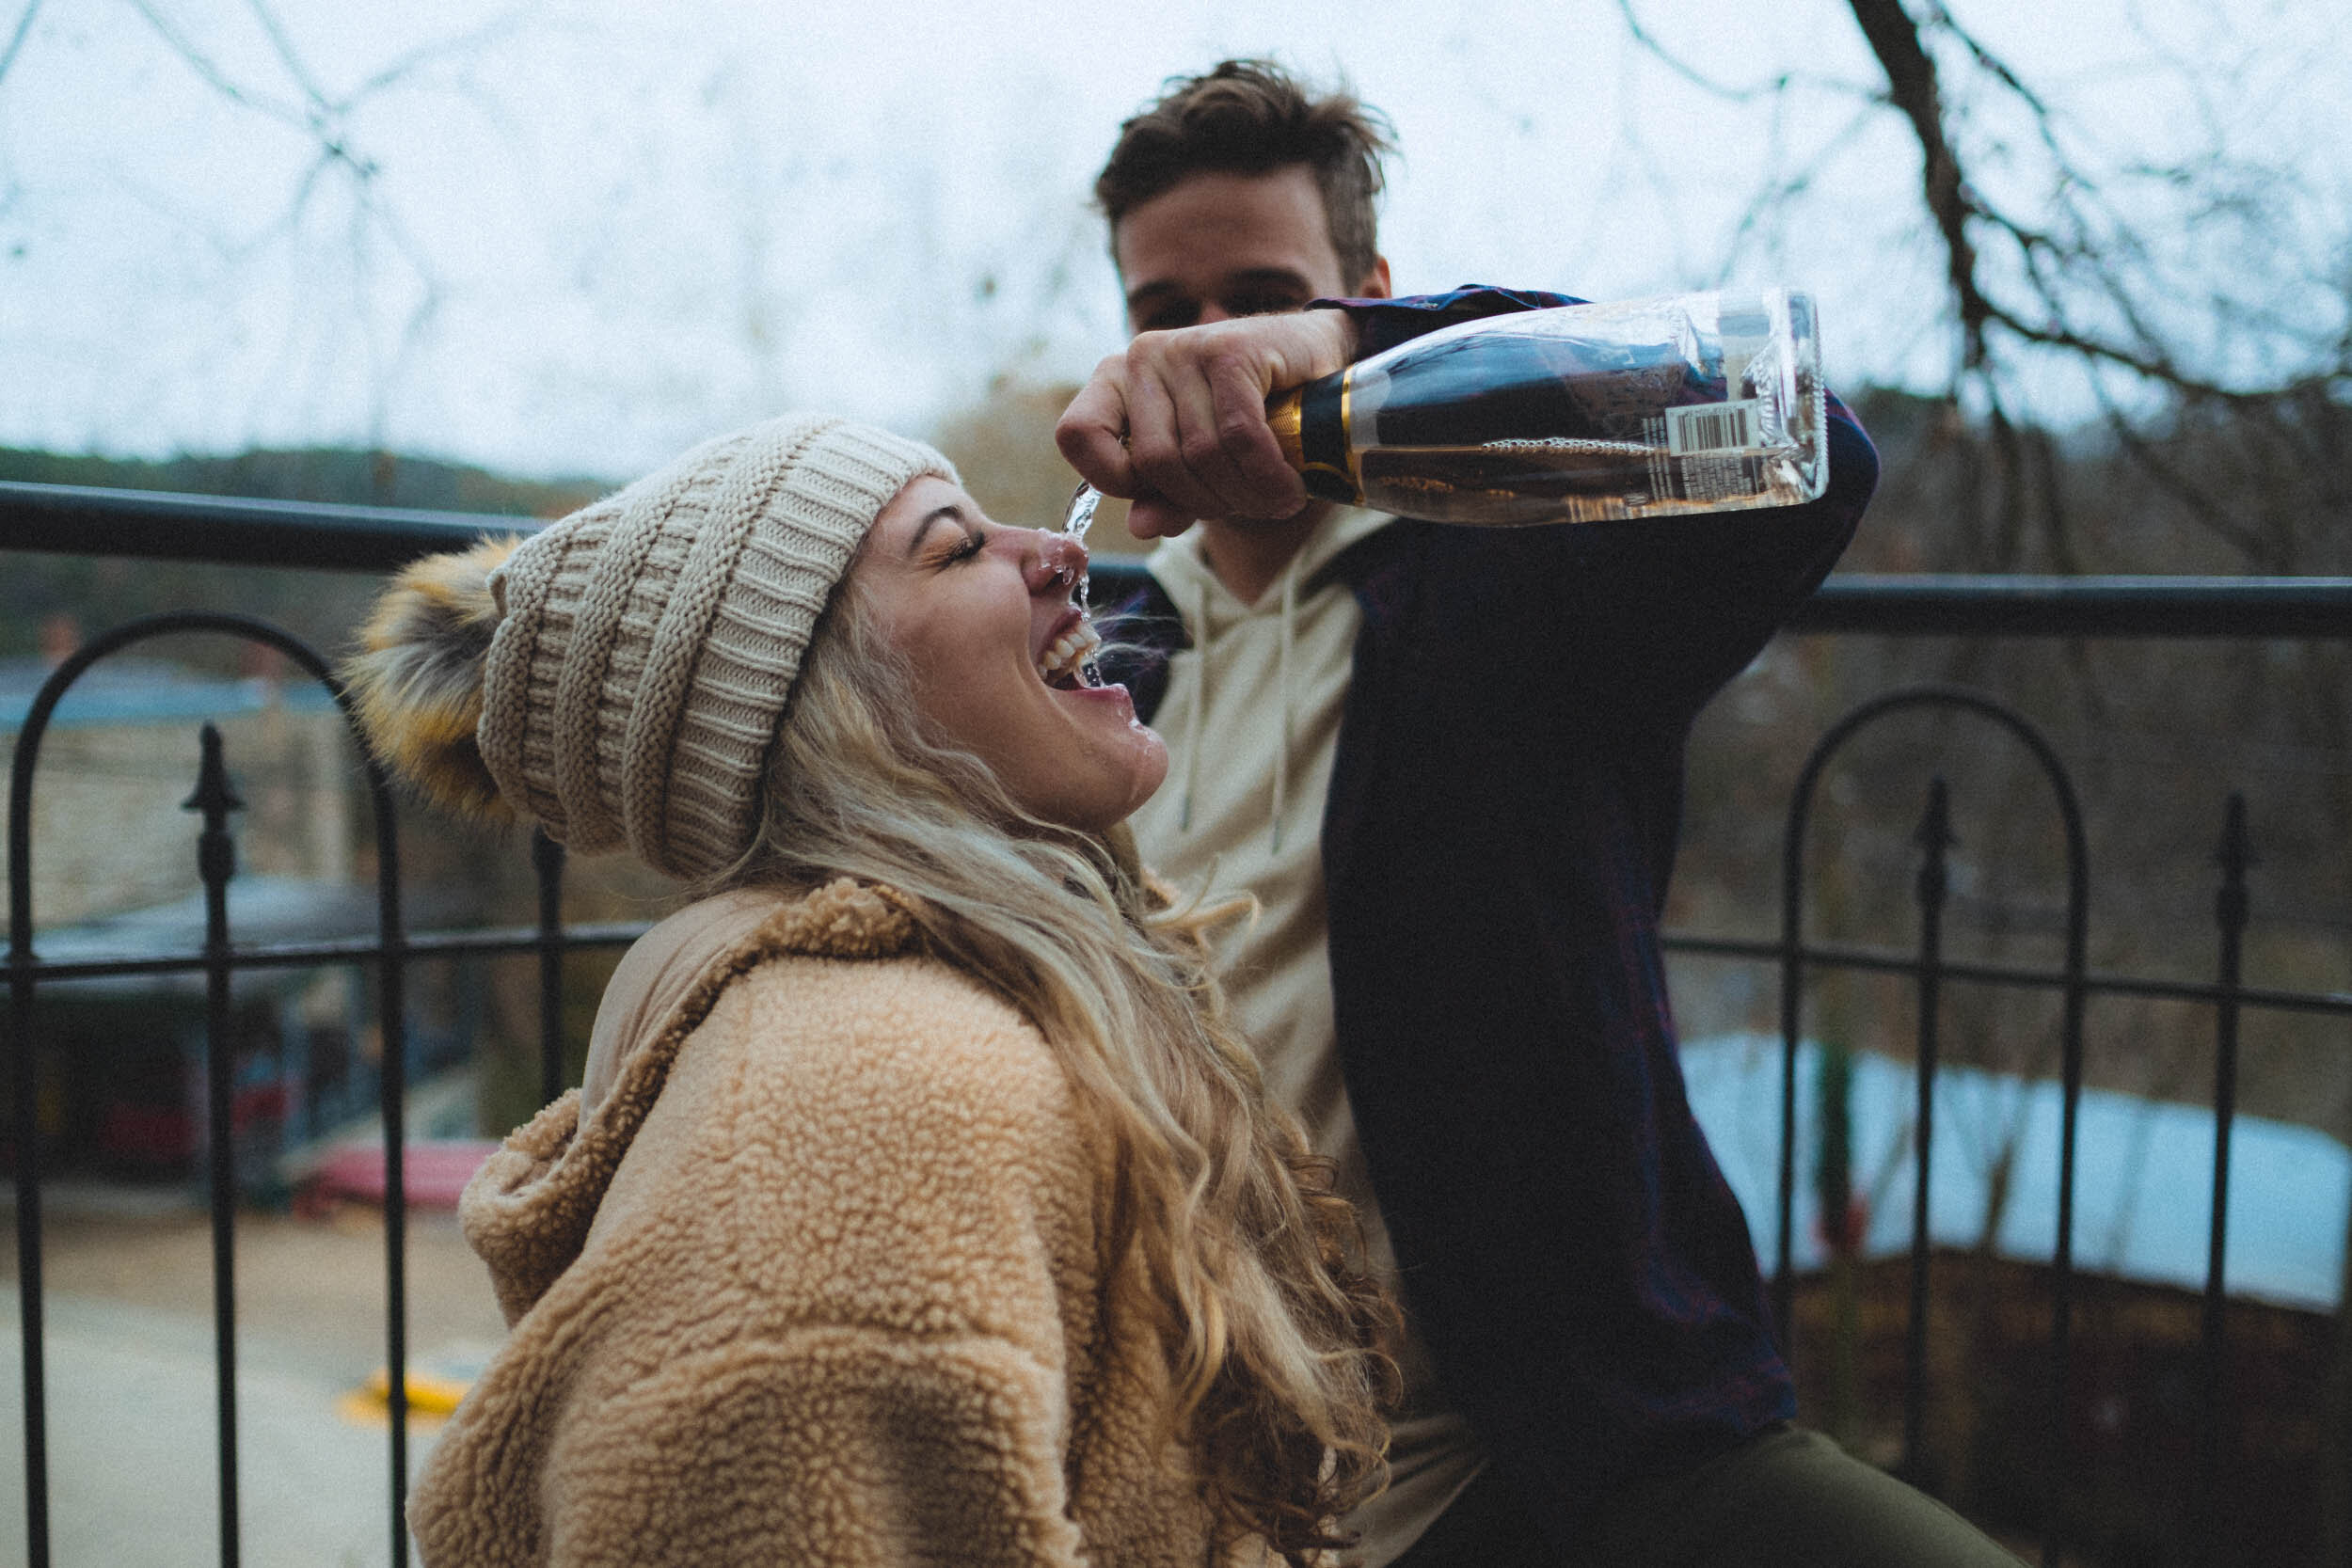 Failed Pinterest pose with champagne during engagement session